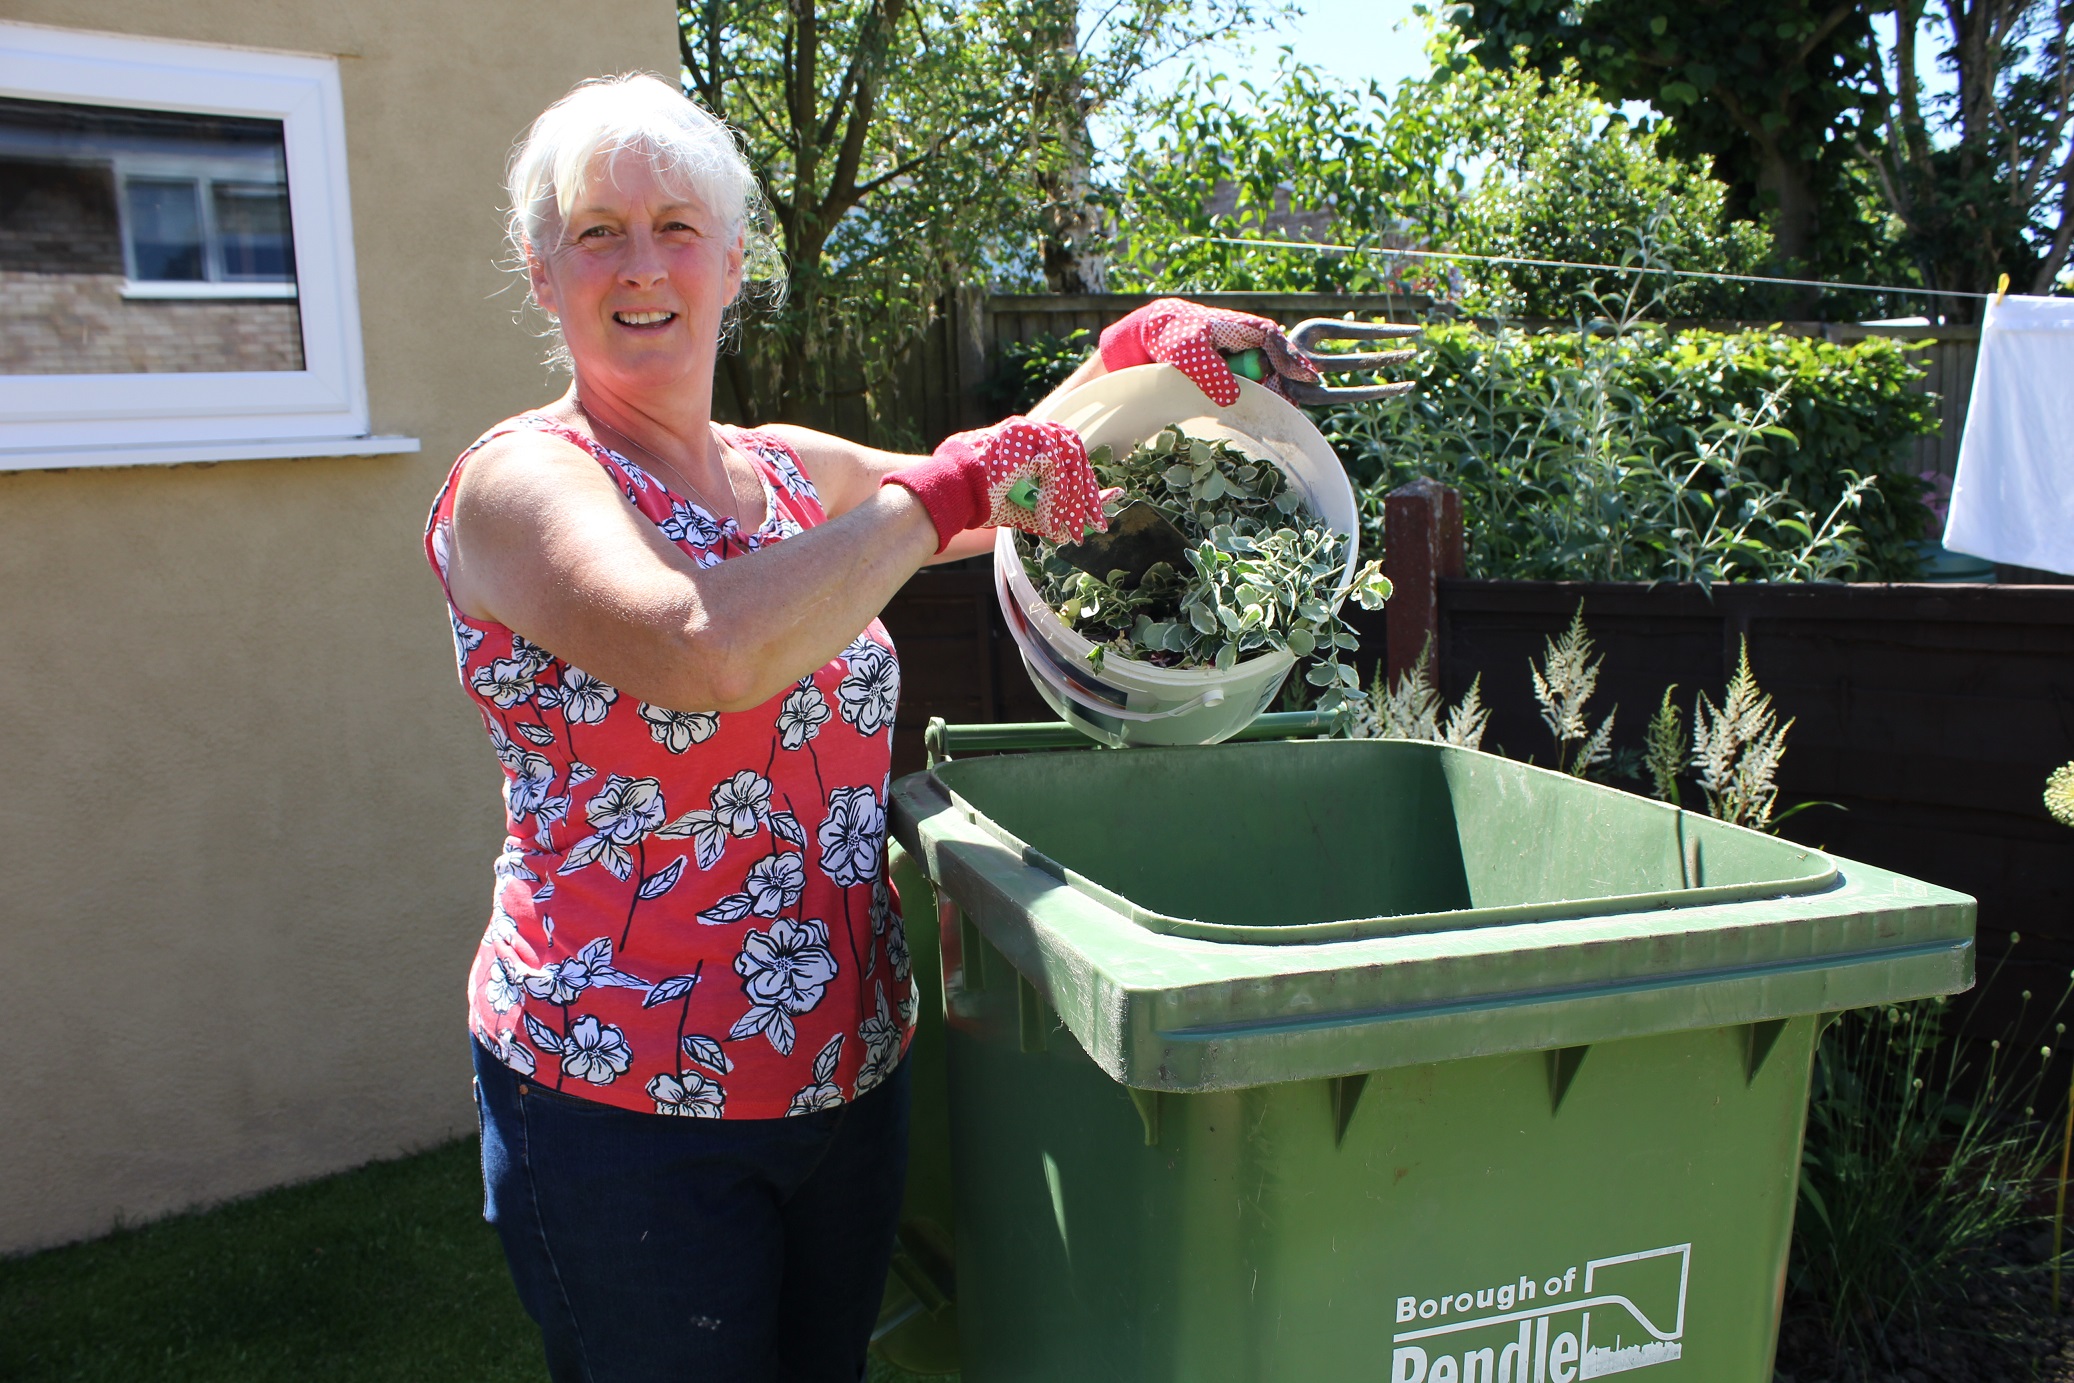 Don’t forget to sign up for garden waste collections!